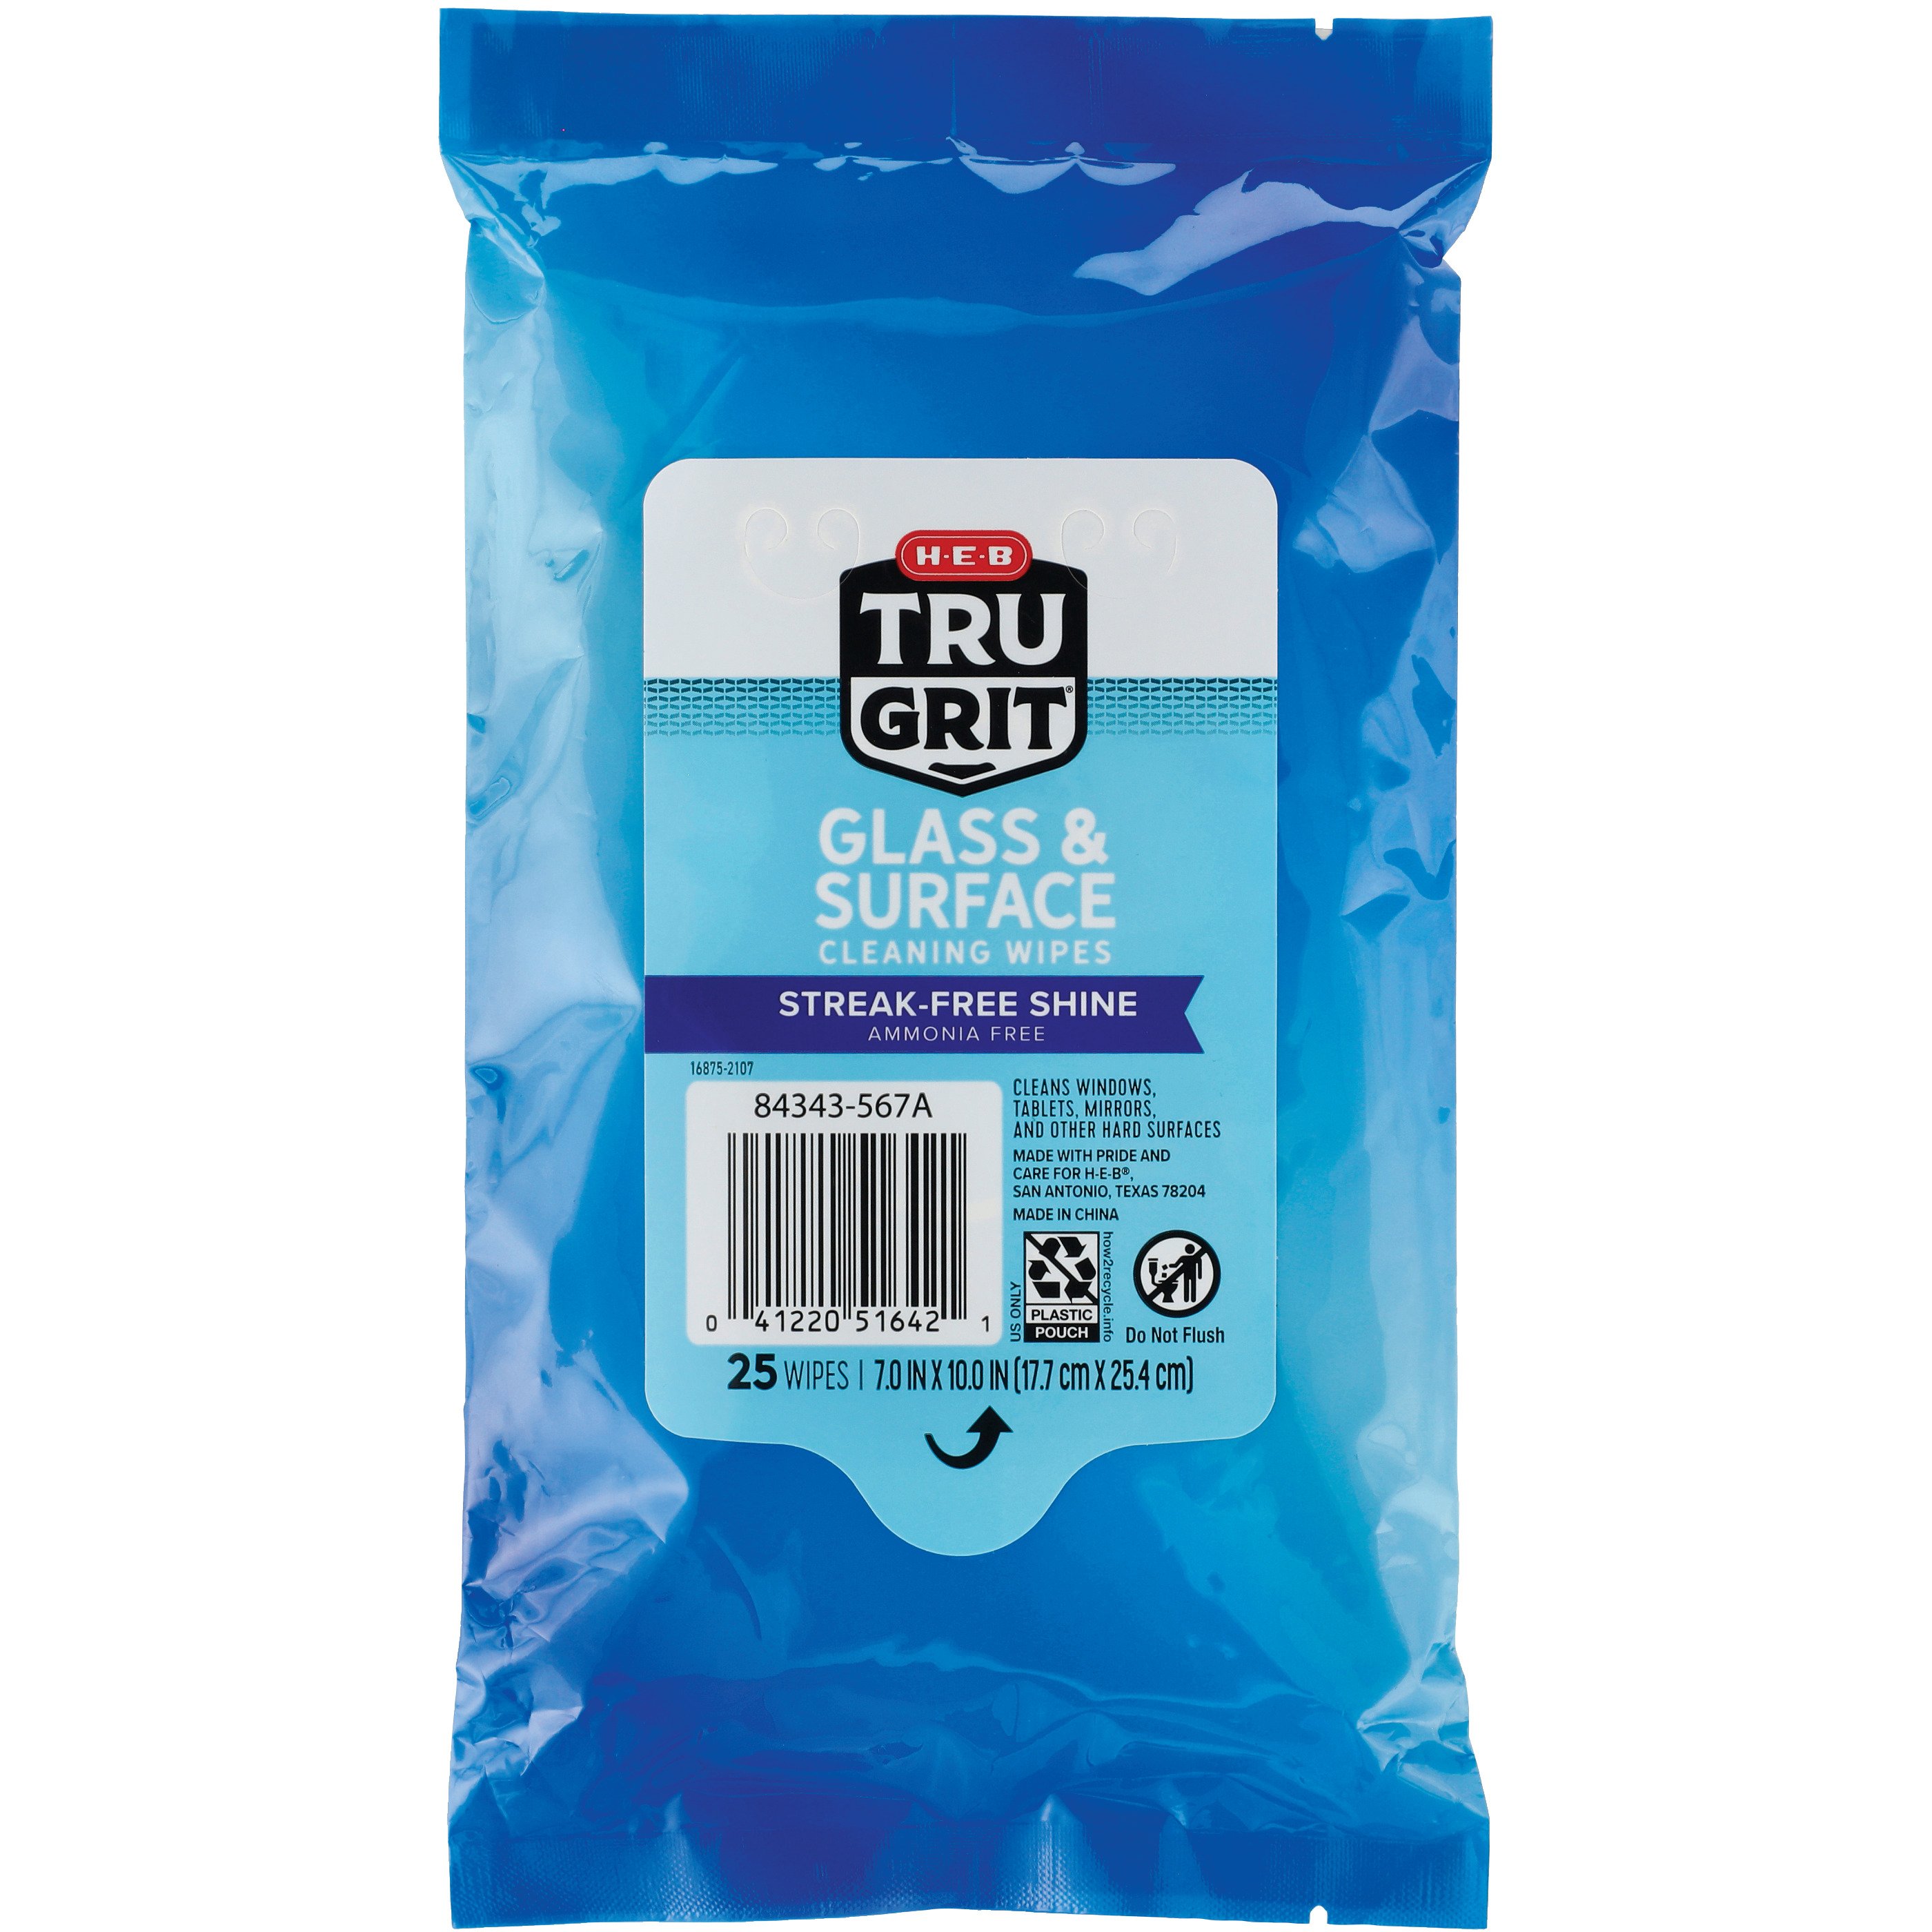 H-E-B Tru Grit Glass & Surface Cleaning Wipes